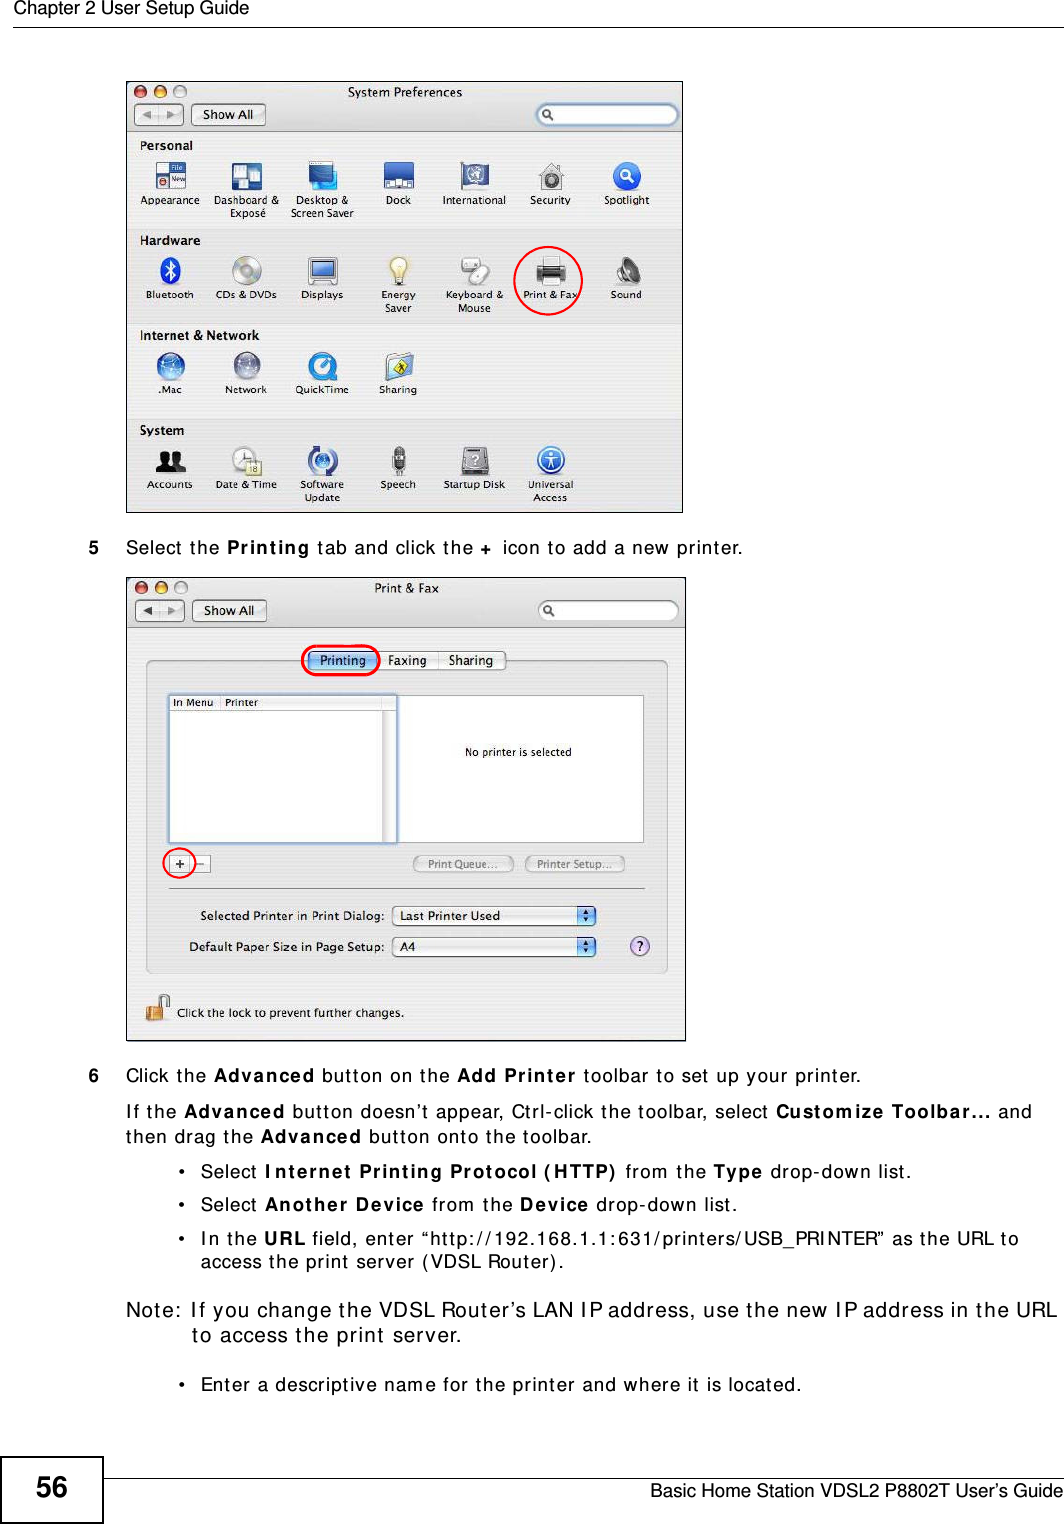 Chapter 2 User Setup GuideBasic Home Station VDSL2 P8802T User’s Guide565Select  the Pr int in g tab and click t he + icon to add a new pr int er.6Click the Advance d butt on on the Add Pr inter  toolbar t o set  up your print er. I f t he Adva nced but t on doesn’t appear, Ctrl- click the t oolbar, select Cu st om ize Toolbar ... and then drag t he Adva nce d button ont o t he t oolbar.• Select I nt e rnet Pr int ing Protocol ( H TTP)  from  the Type drop-down list .• Select Anot he r Device from  t he D evice drop- down list.• In the URL field, ent er “ht t p: / / 192.168.1.1: 631/ printer s/ USB_PRI NTER”  as t he URL to access the print server ( VDSL Router) .Note:  I f you change t he VDSL Rout er’s LAN I P address, use the new I P address in the URL to access t he print server.• Ent er a descriptive nam e for the print er and where it  is located.